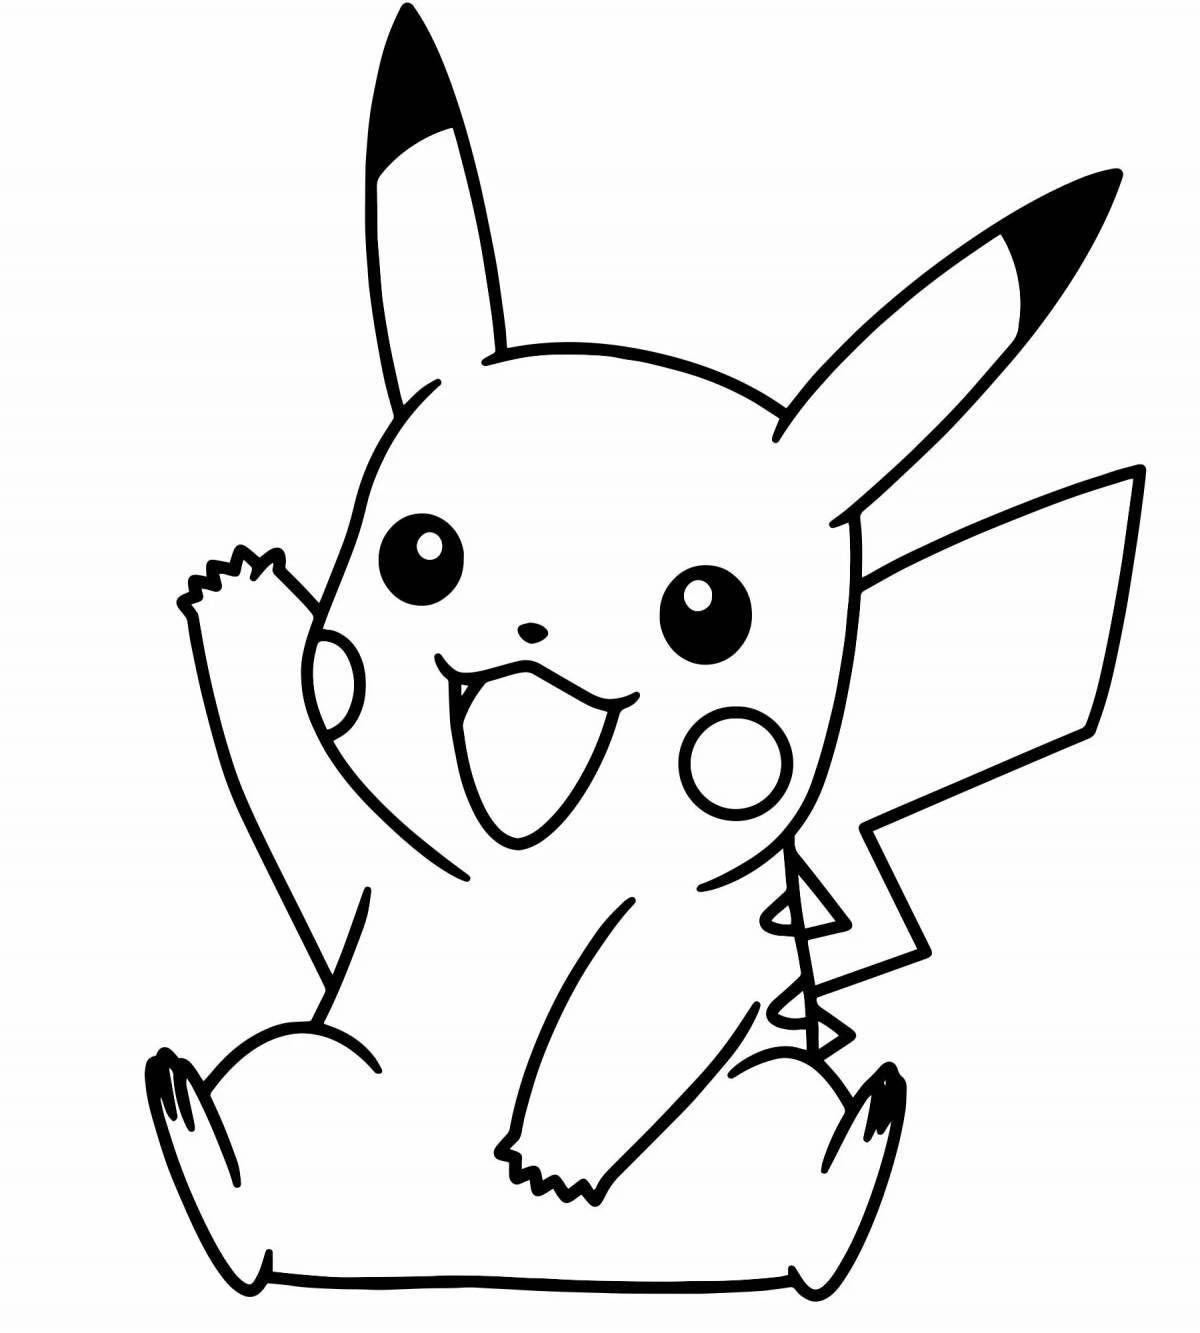 Coloring pikachu for boys